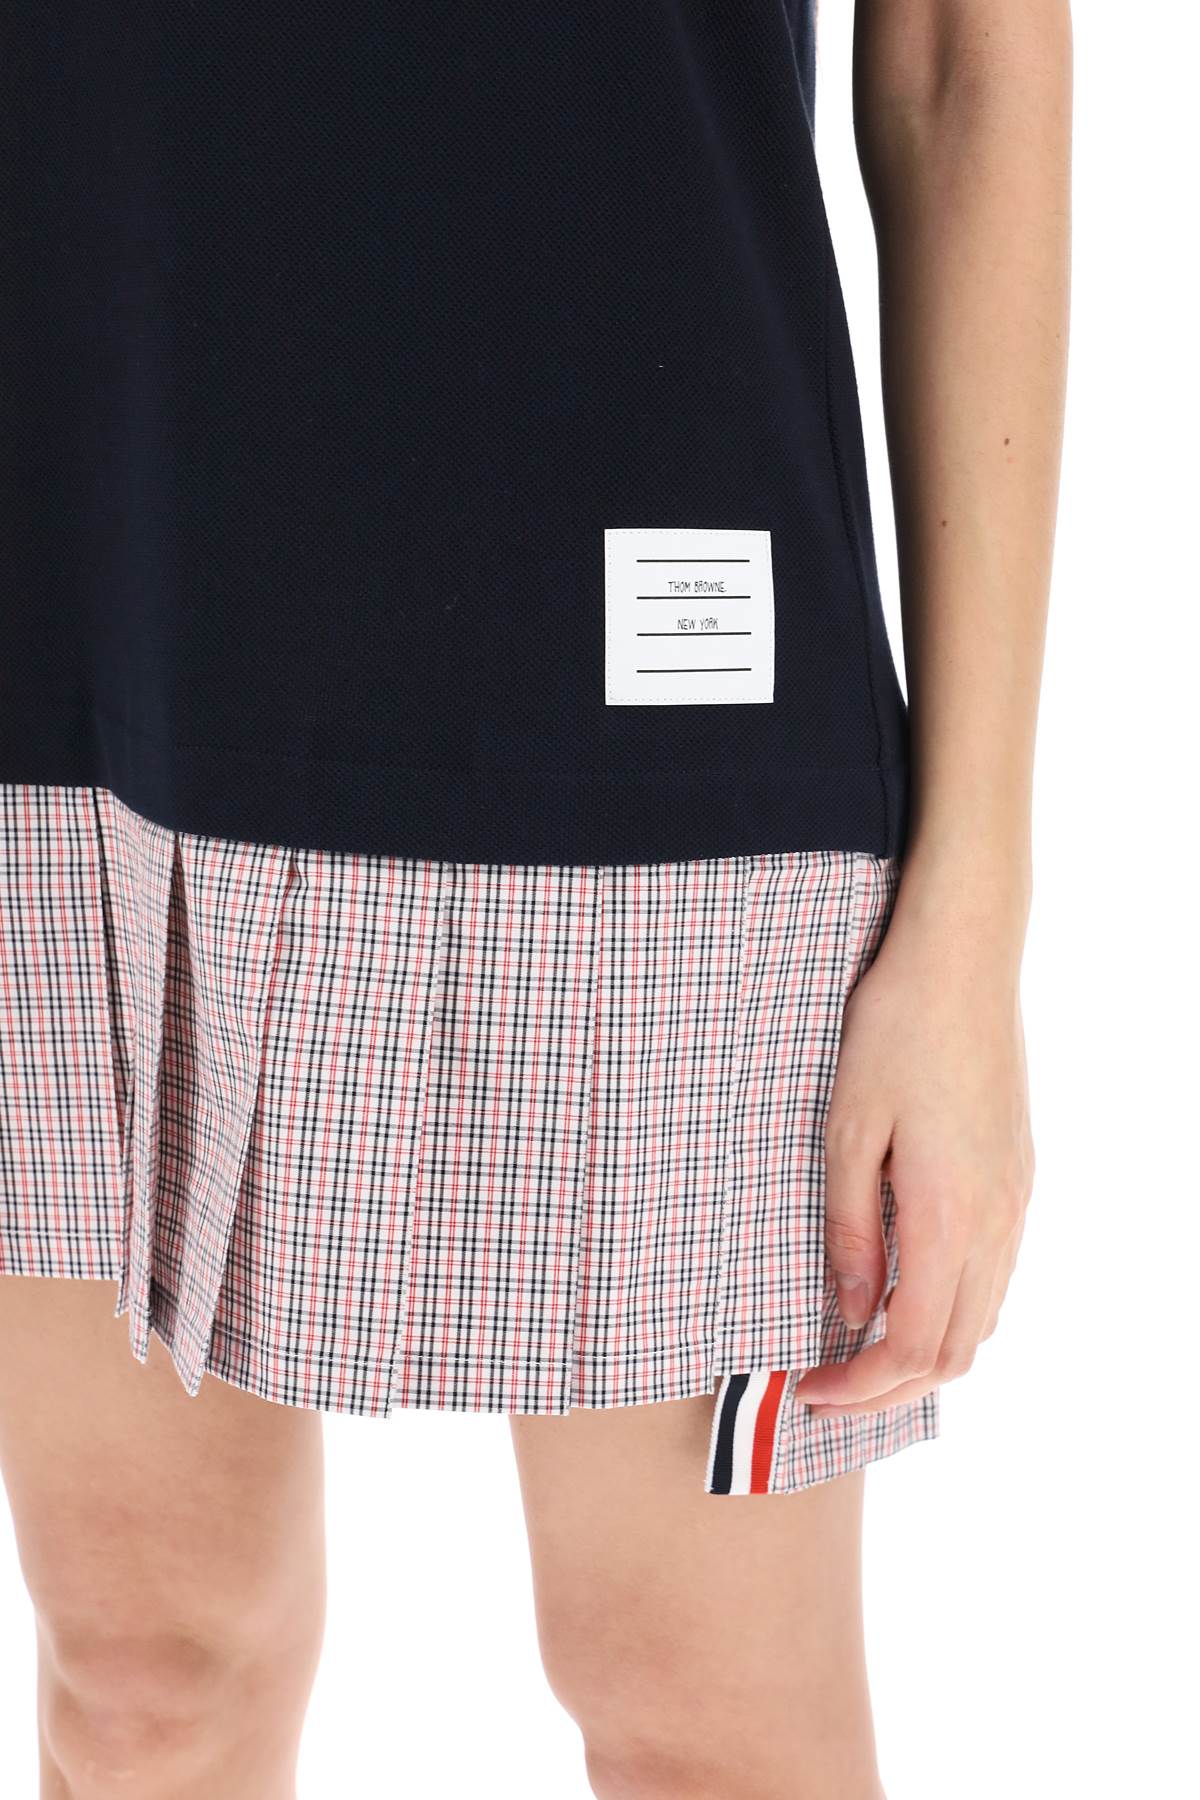 Thom browne mini polo-style dress with pleated bottom.-3